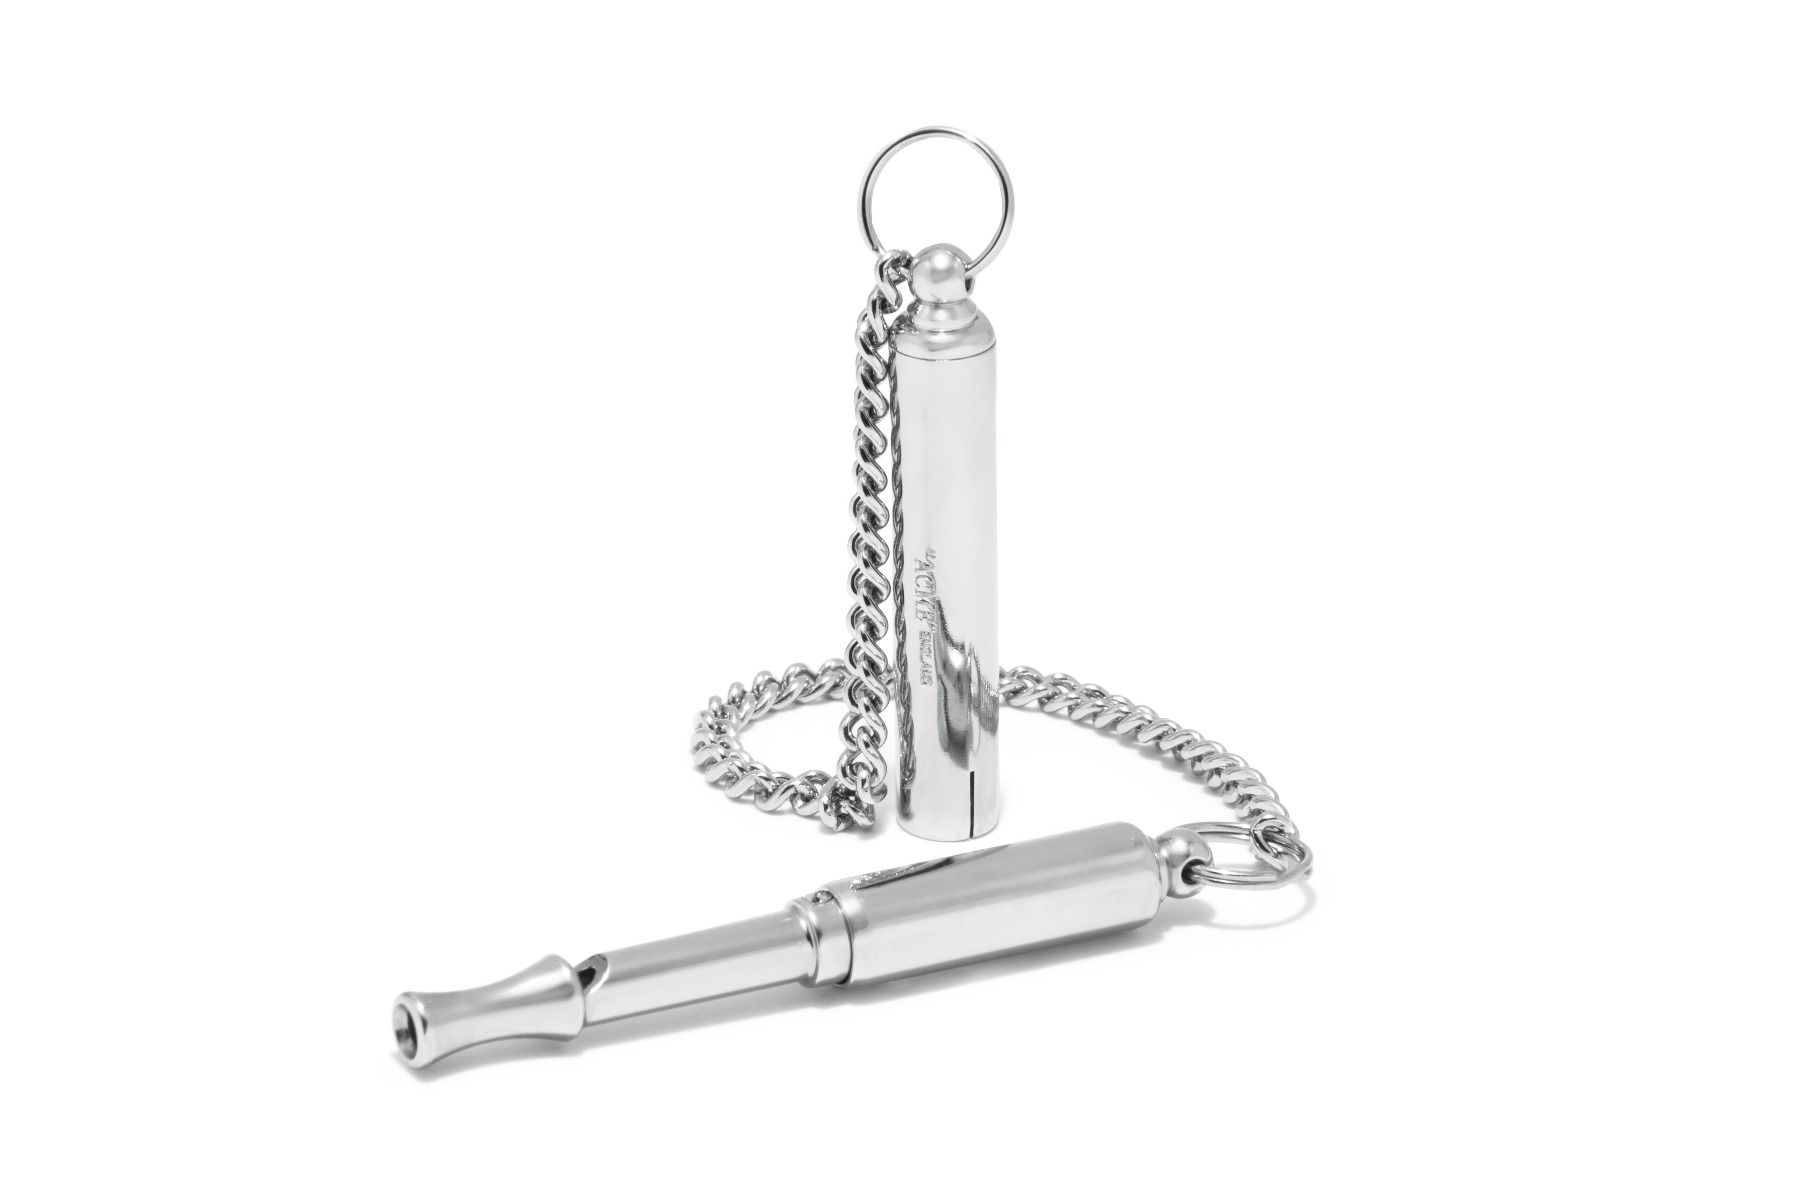 Acme Dog Whistle 535 nickel plated